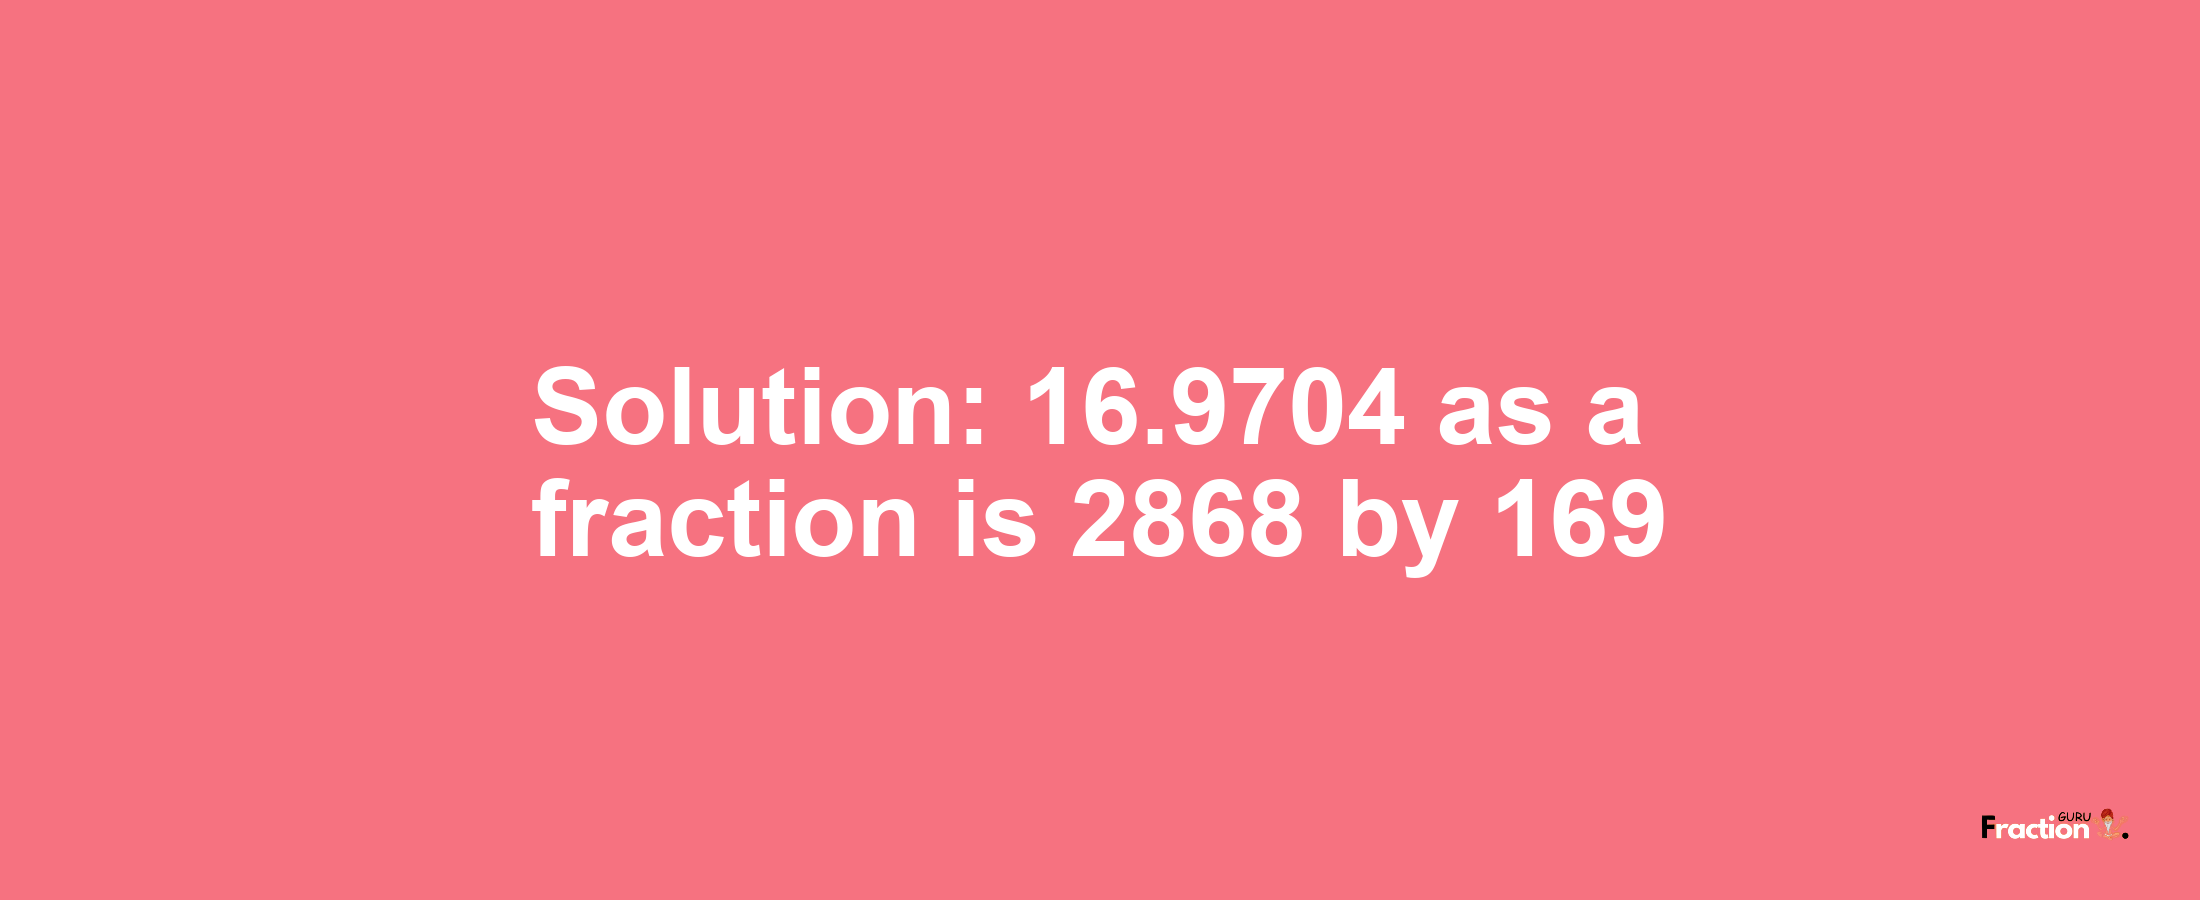 Solution:16.9704 as a fraction is 2868/169